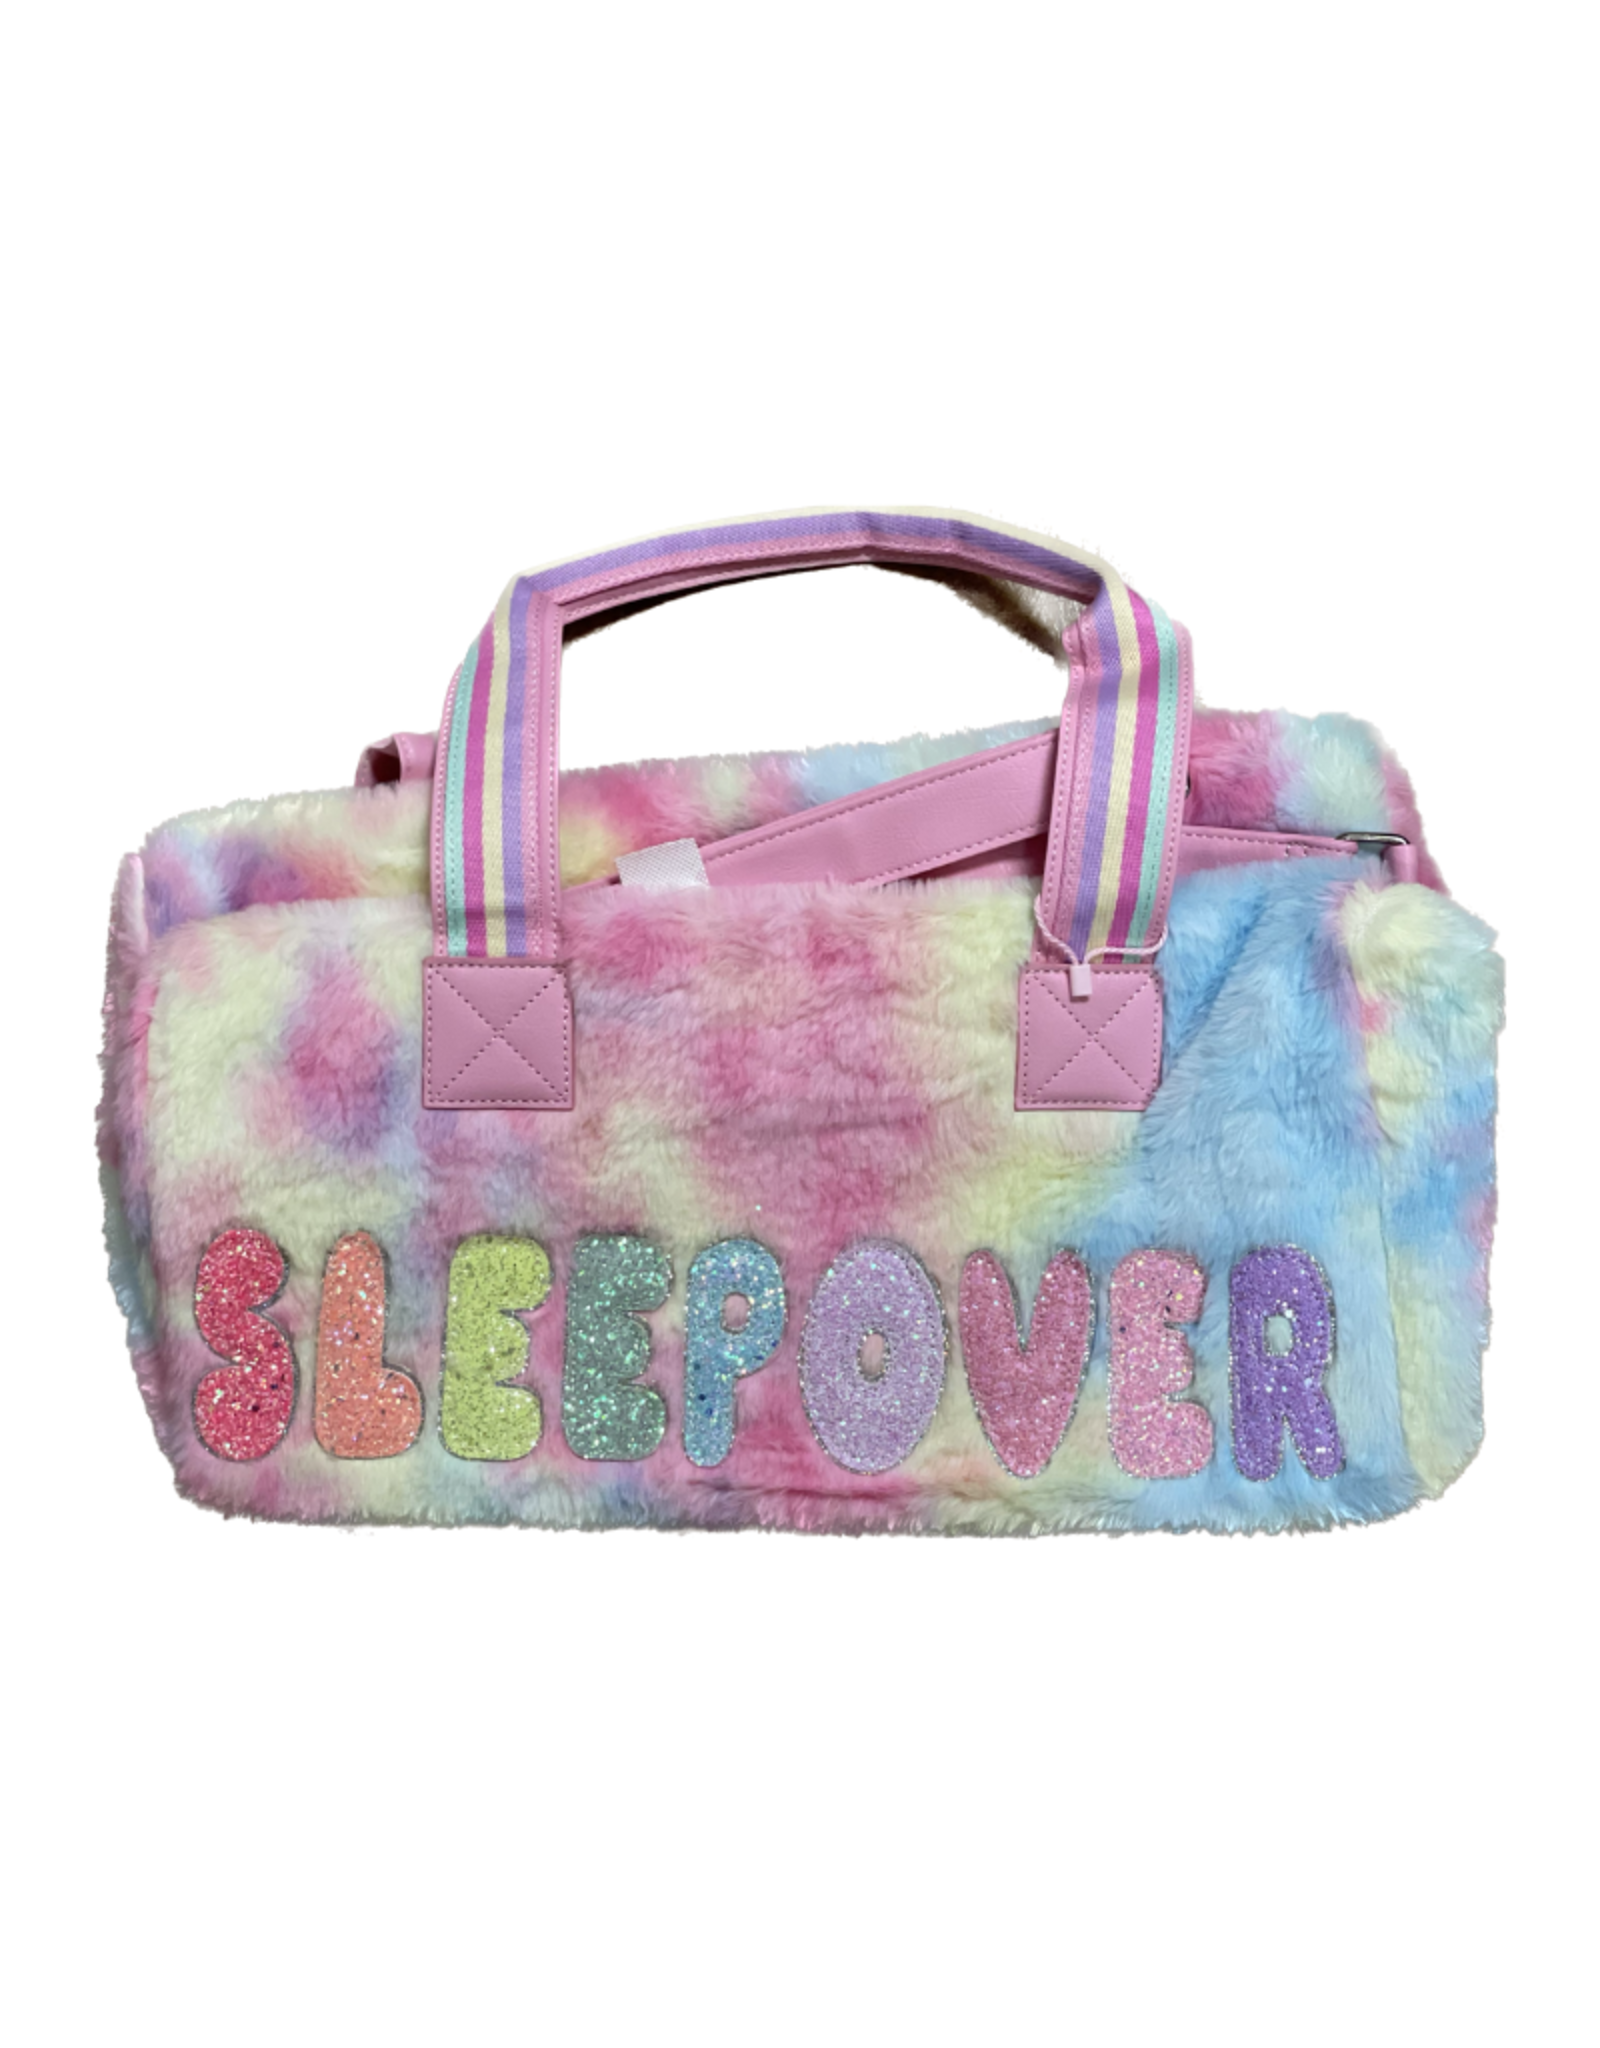 Glam Quilted Large Duffle Bag - Cotton Candy Ombre Sleepover